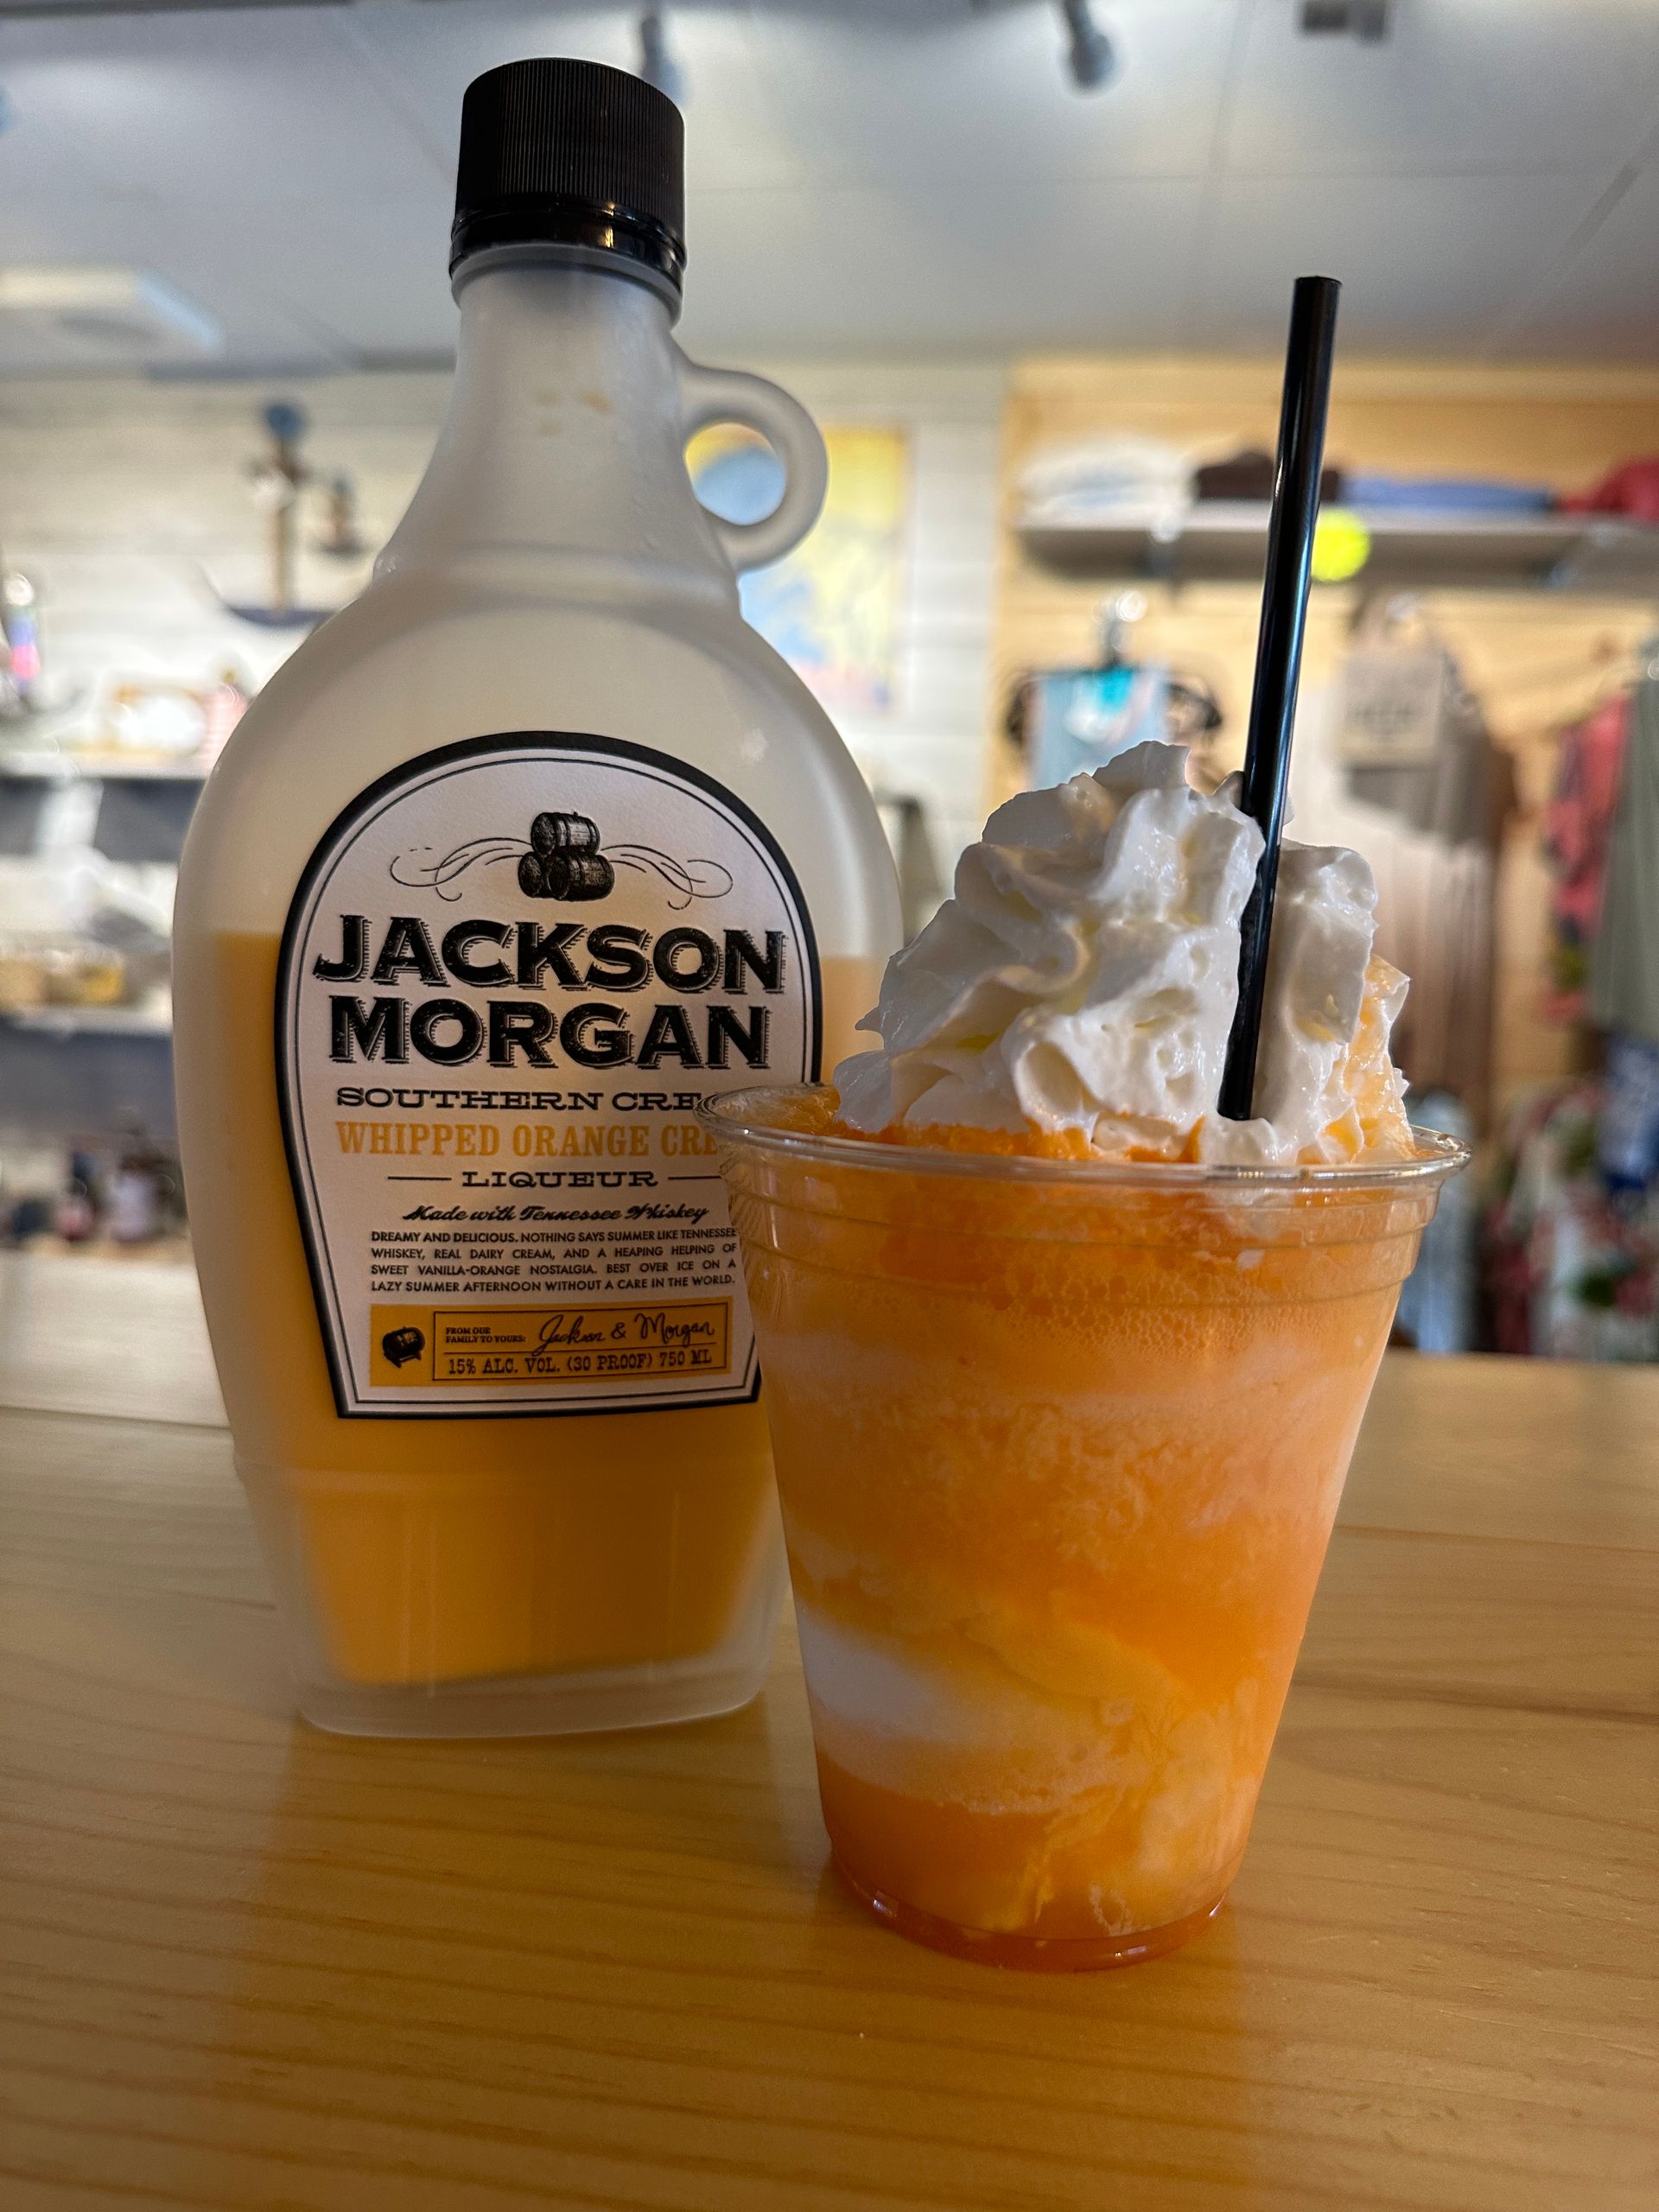 A cup of jackson morgan next to a bottle